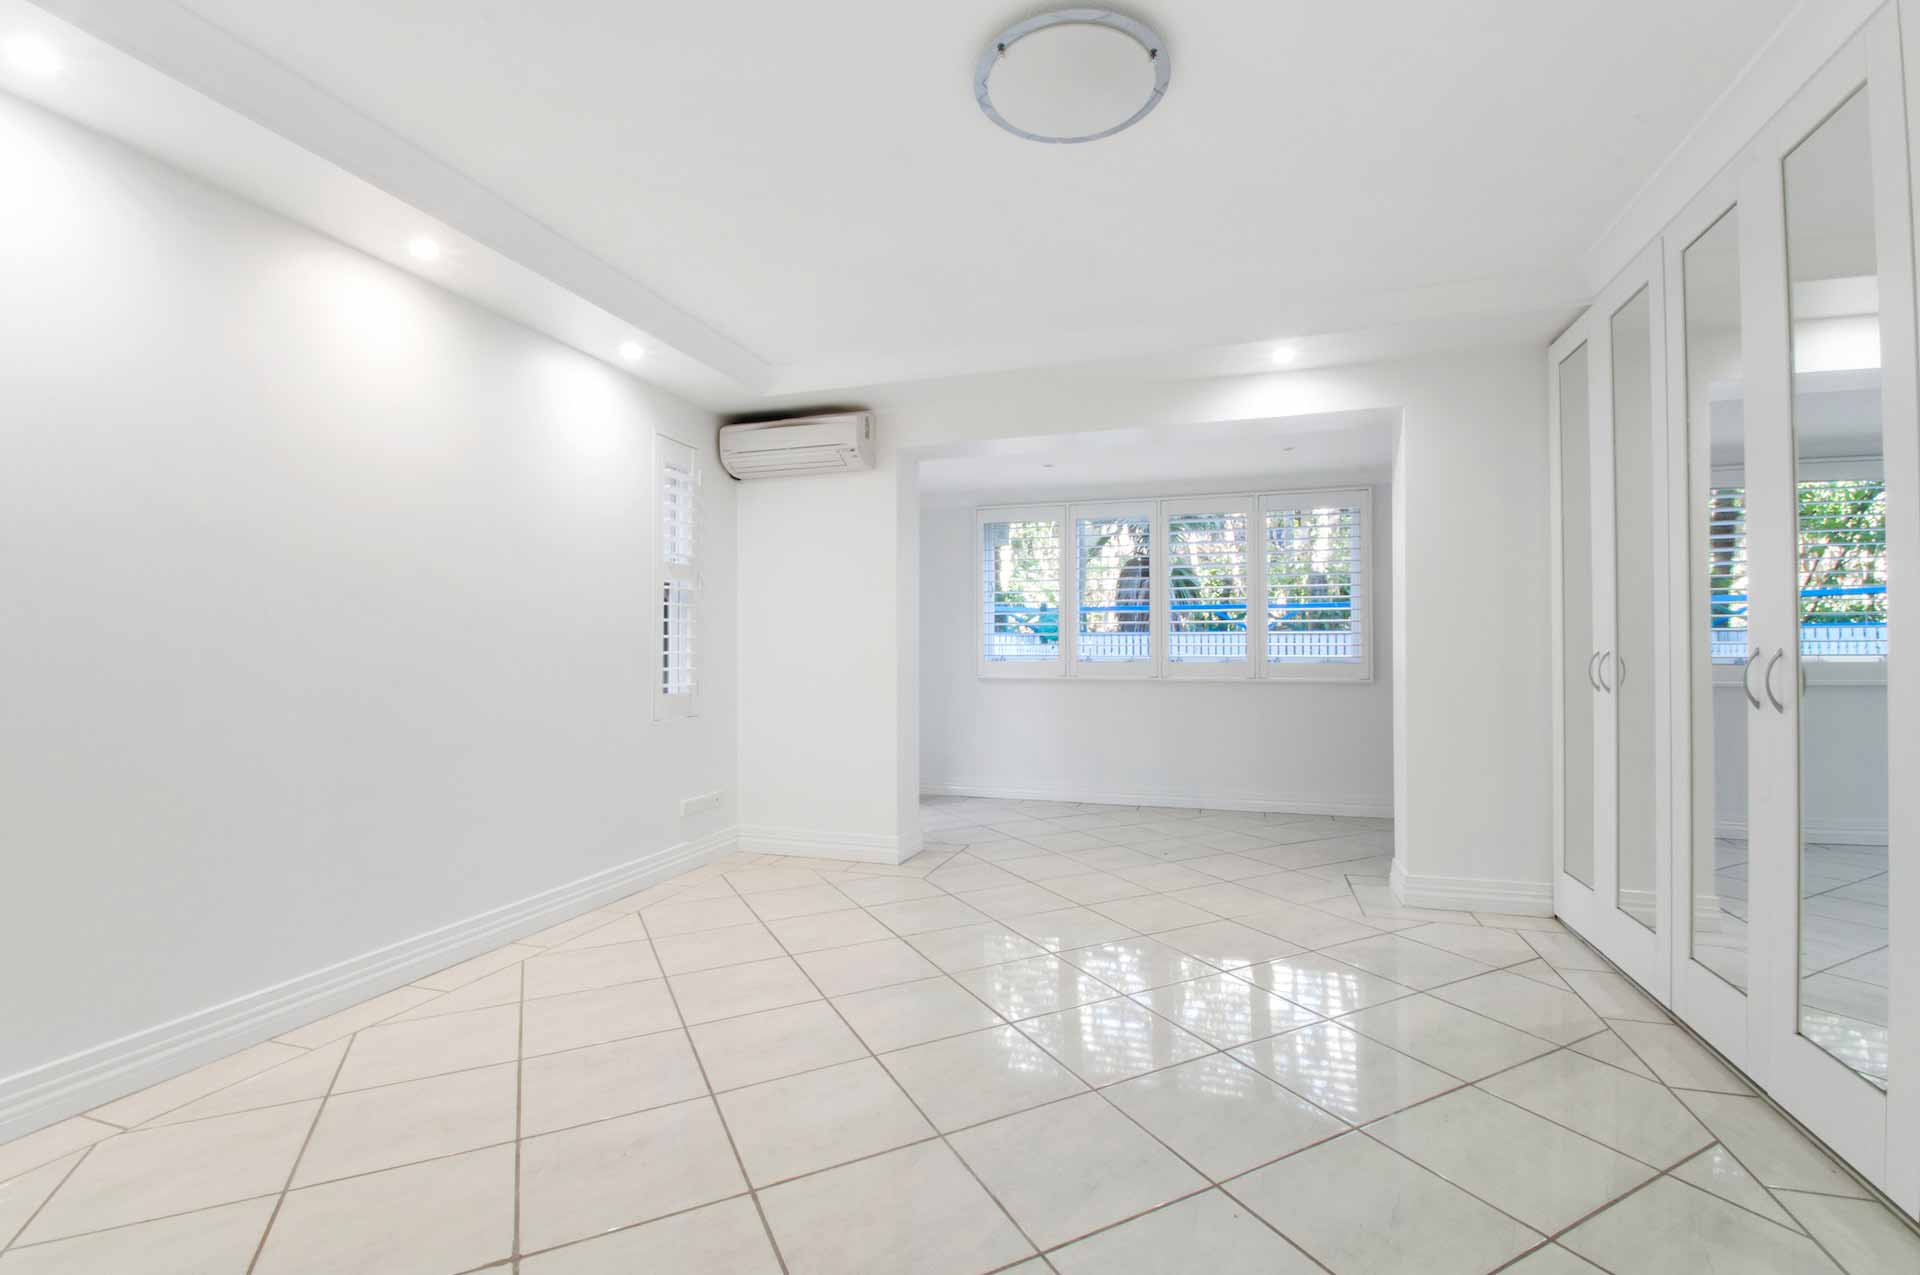 Empty room with white walls and white tile floor